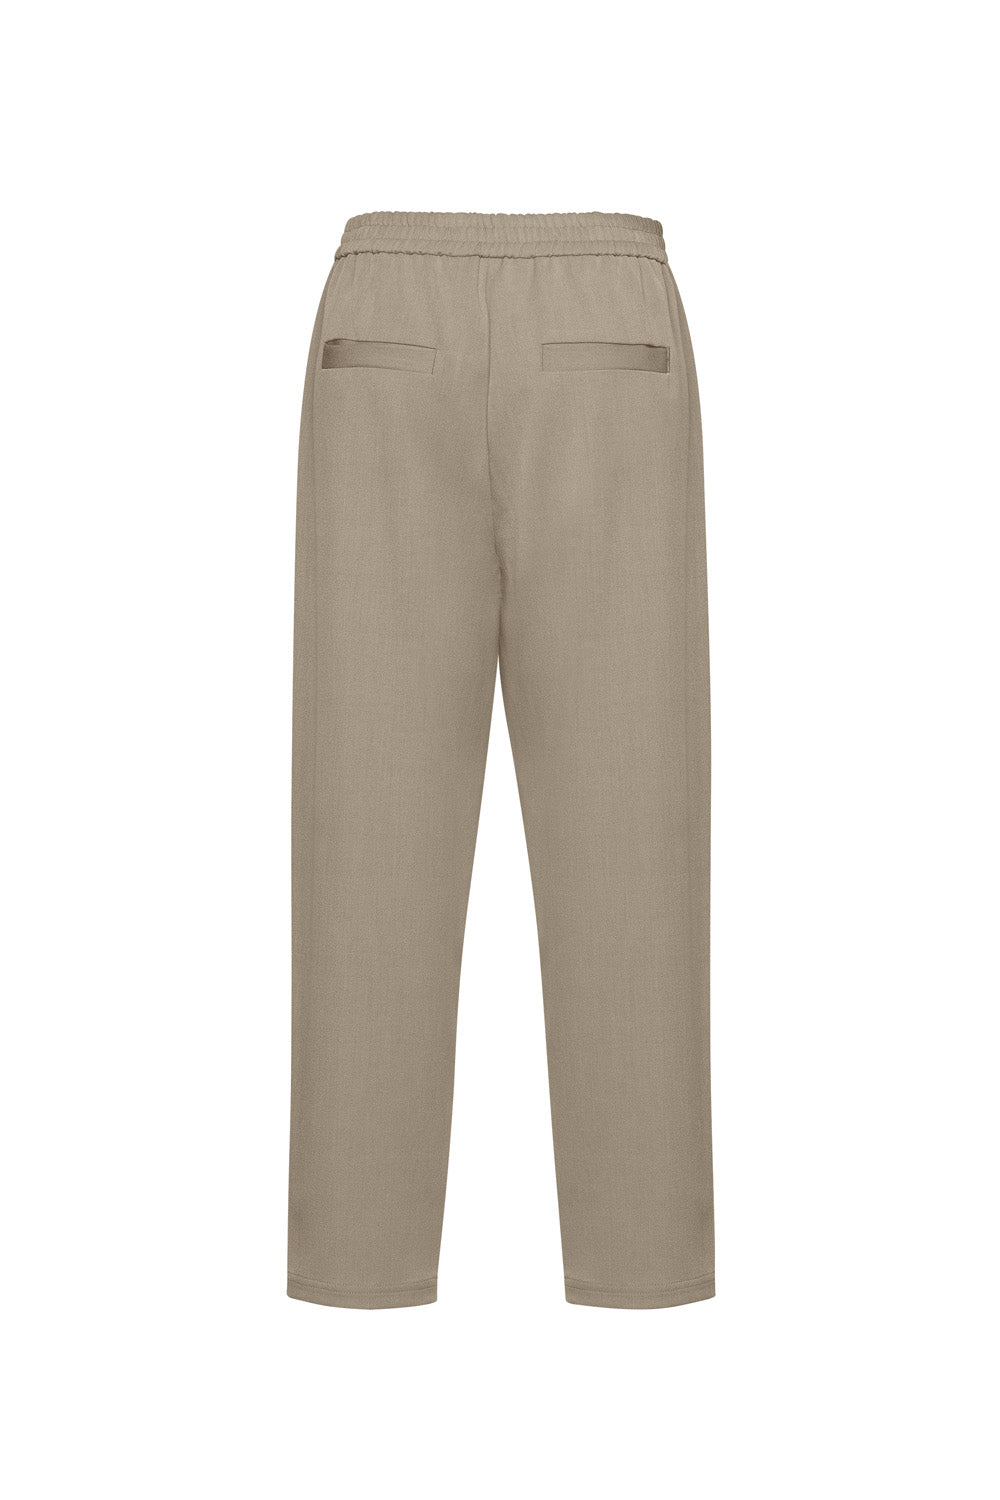 Loobies Story Bethany Pant - Taupe